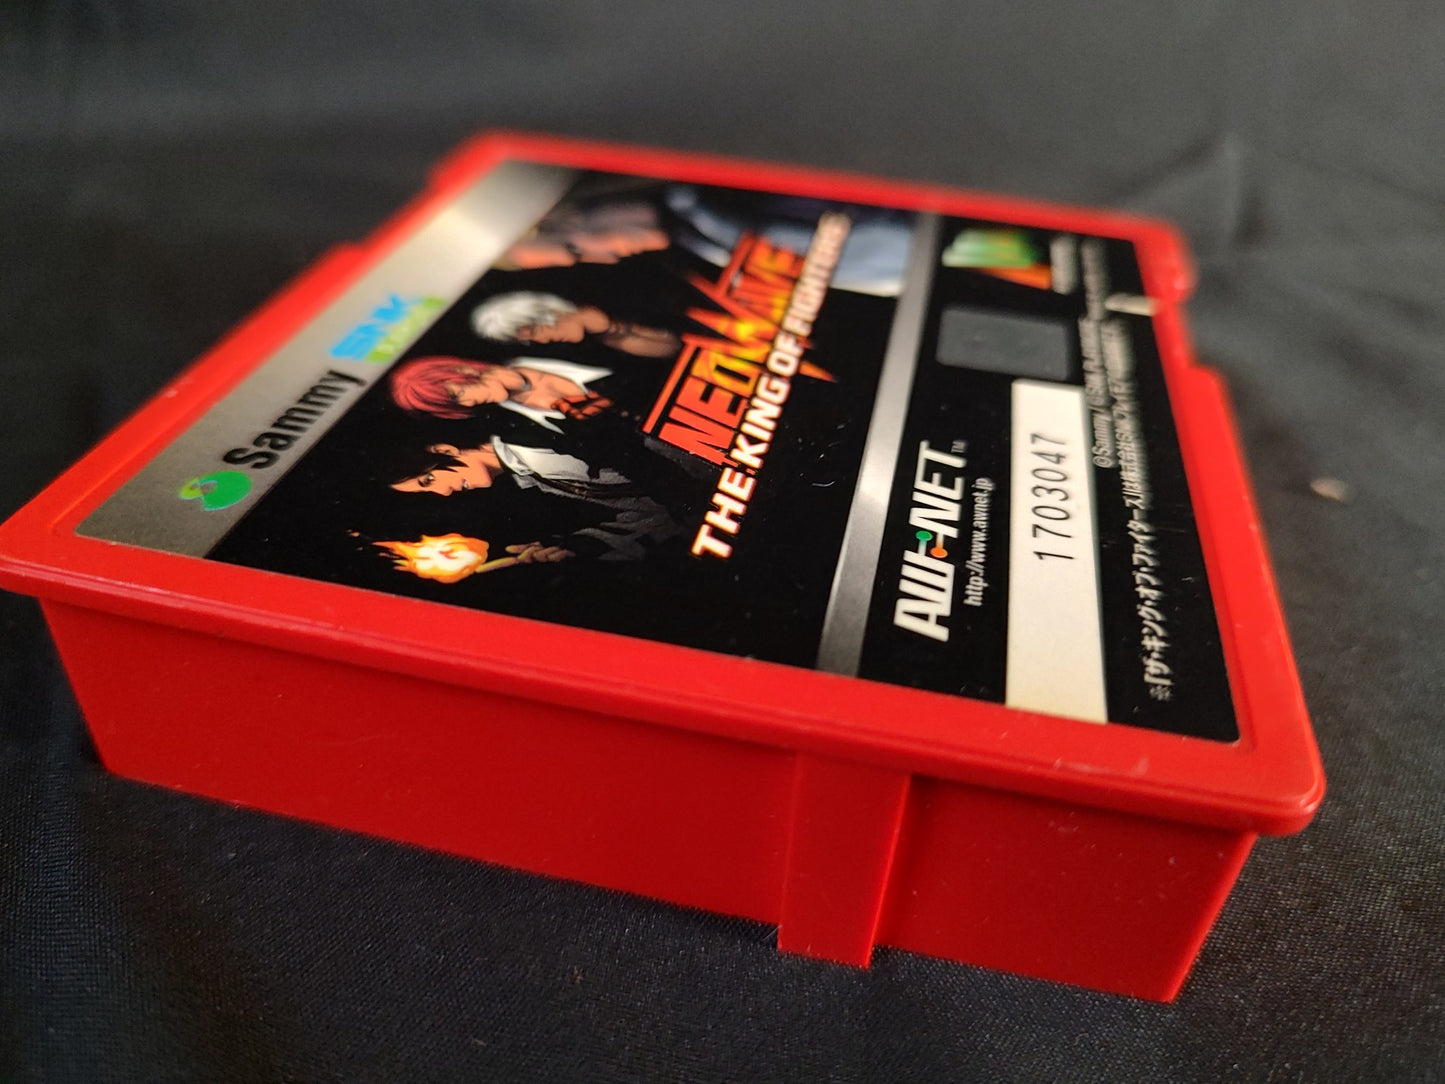 THE KING OF FIGHTERS NEOWAVE Atomiswave JAMMA PCB System Cartridge, Workig-f1208